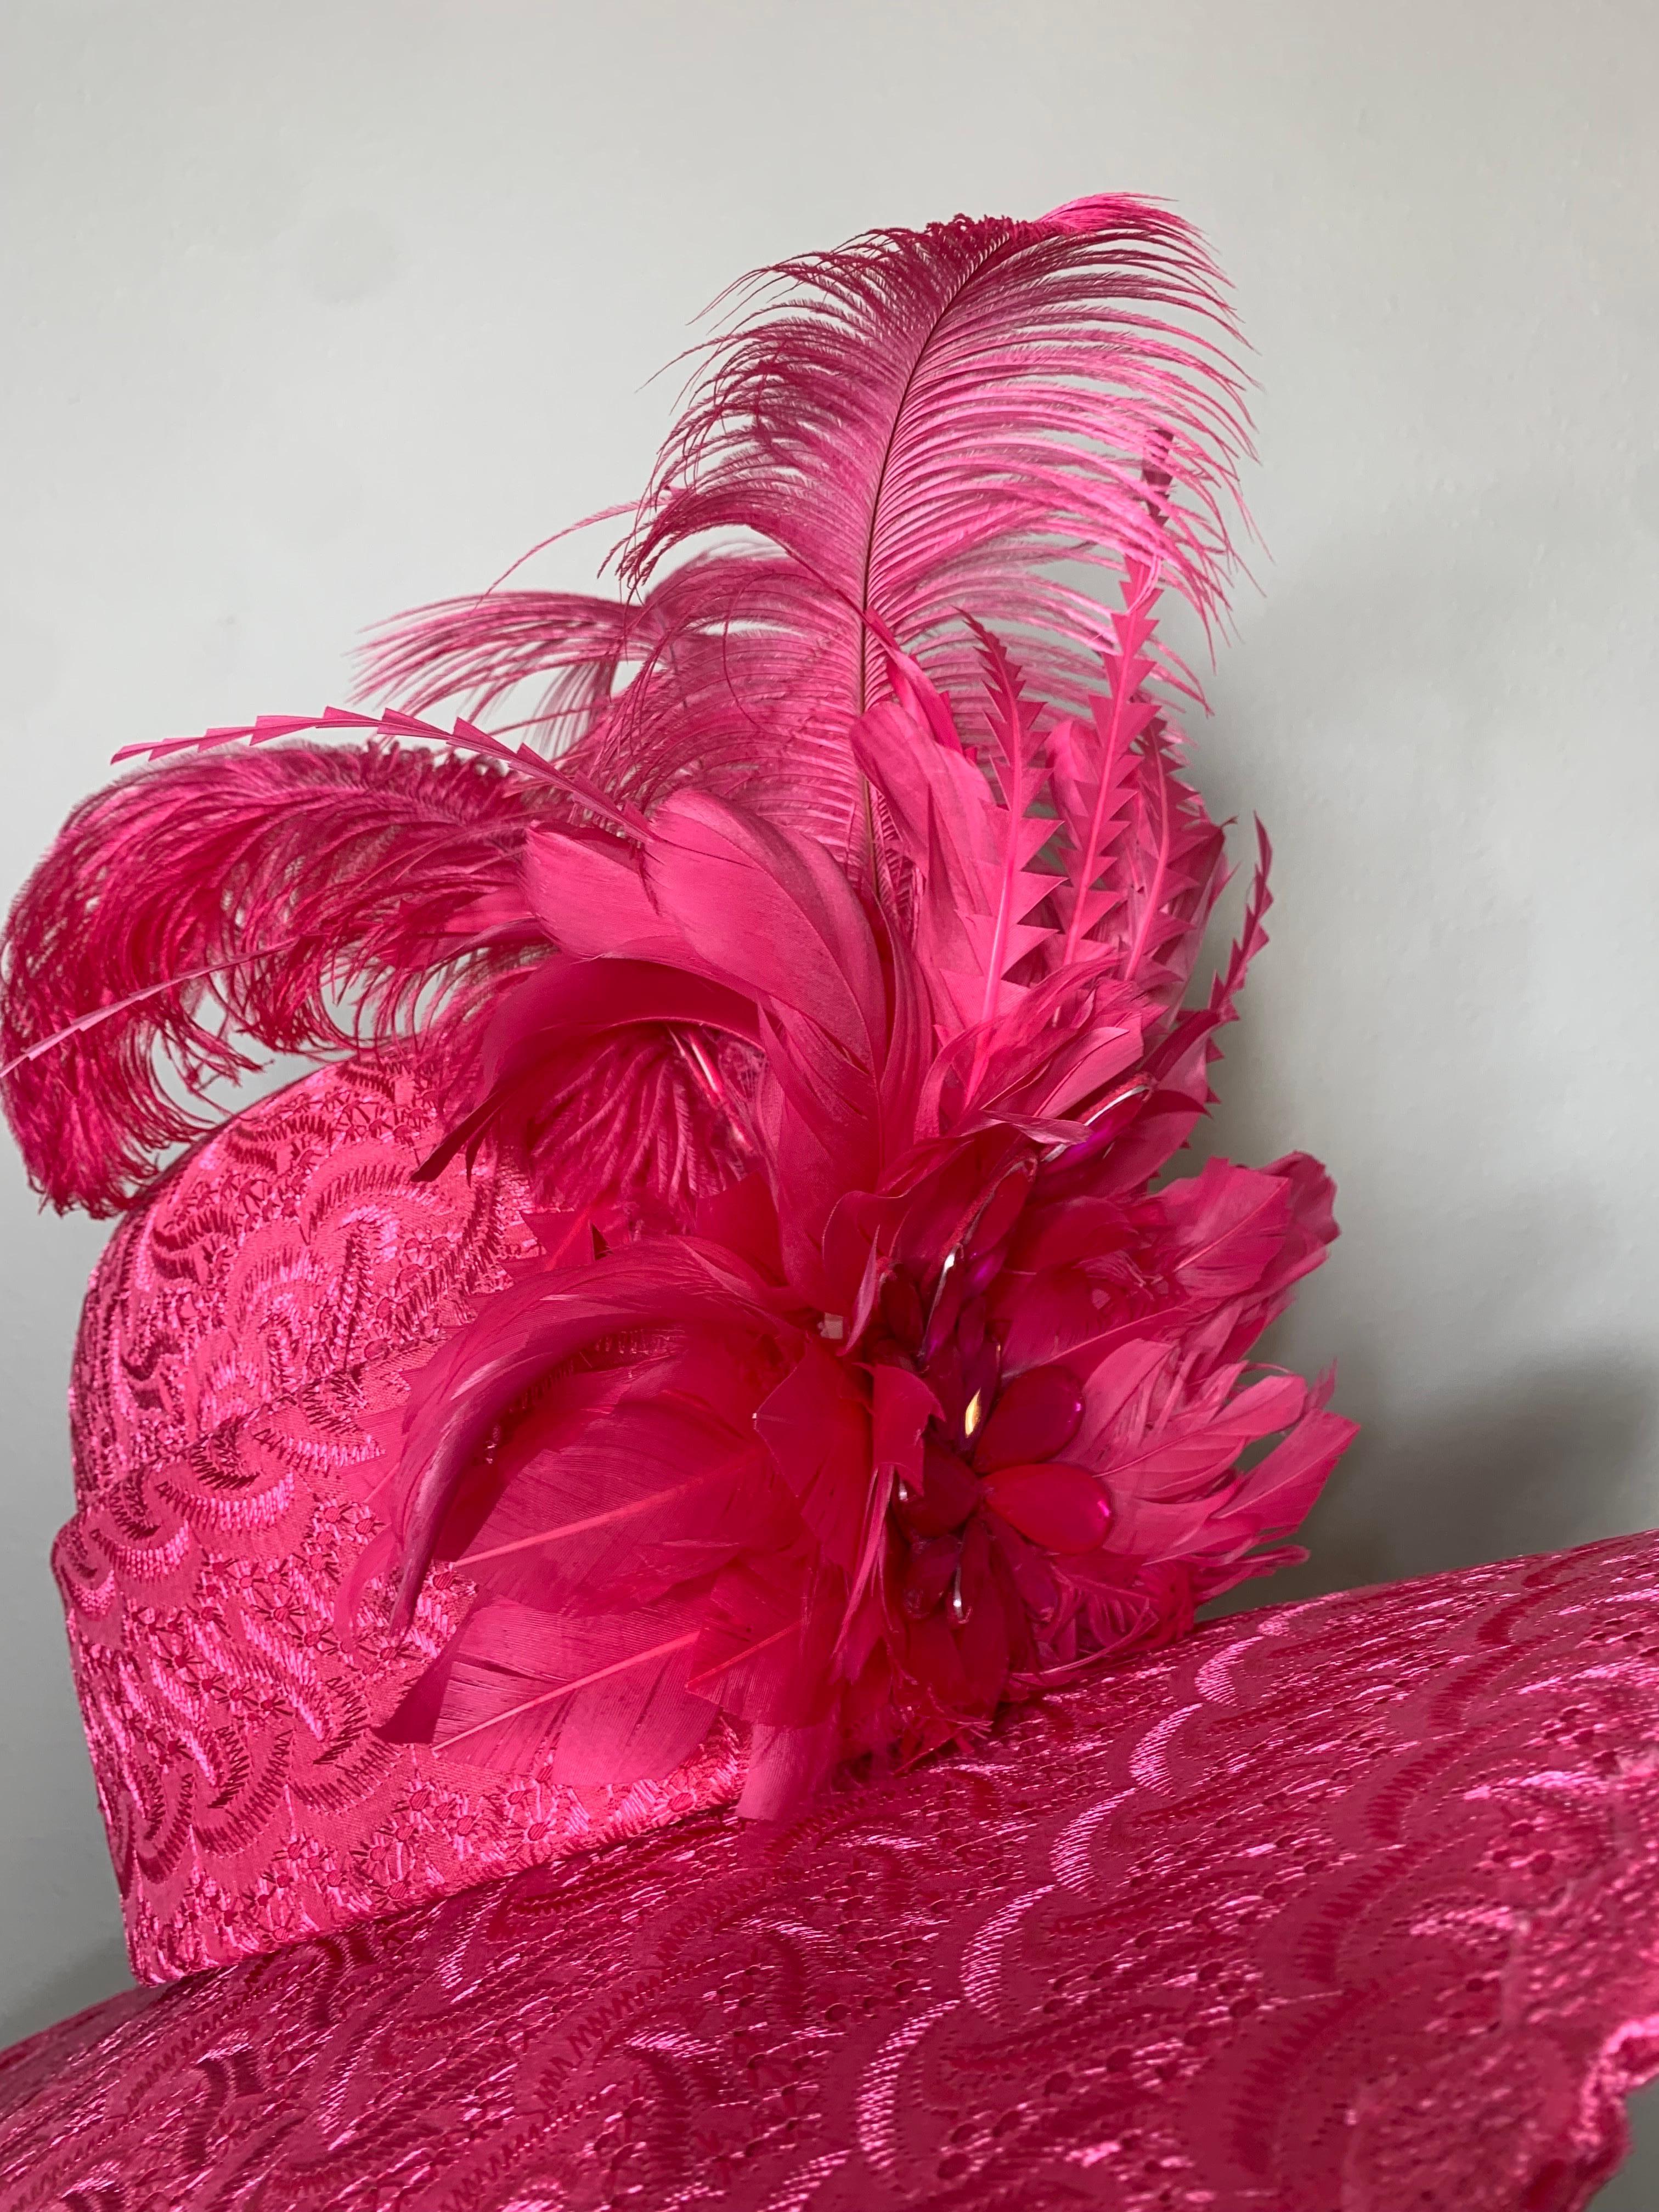 Custom-Made Brilliant Pink Embroidered Cotton Eyelet Wide-Brimmed Hat w Feathers For Sale 11